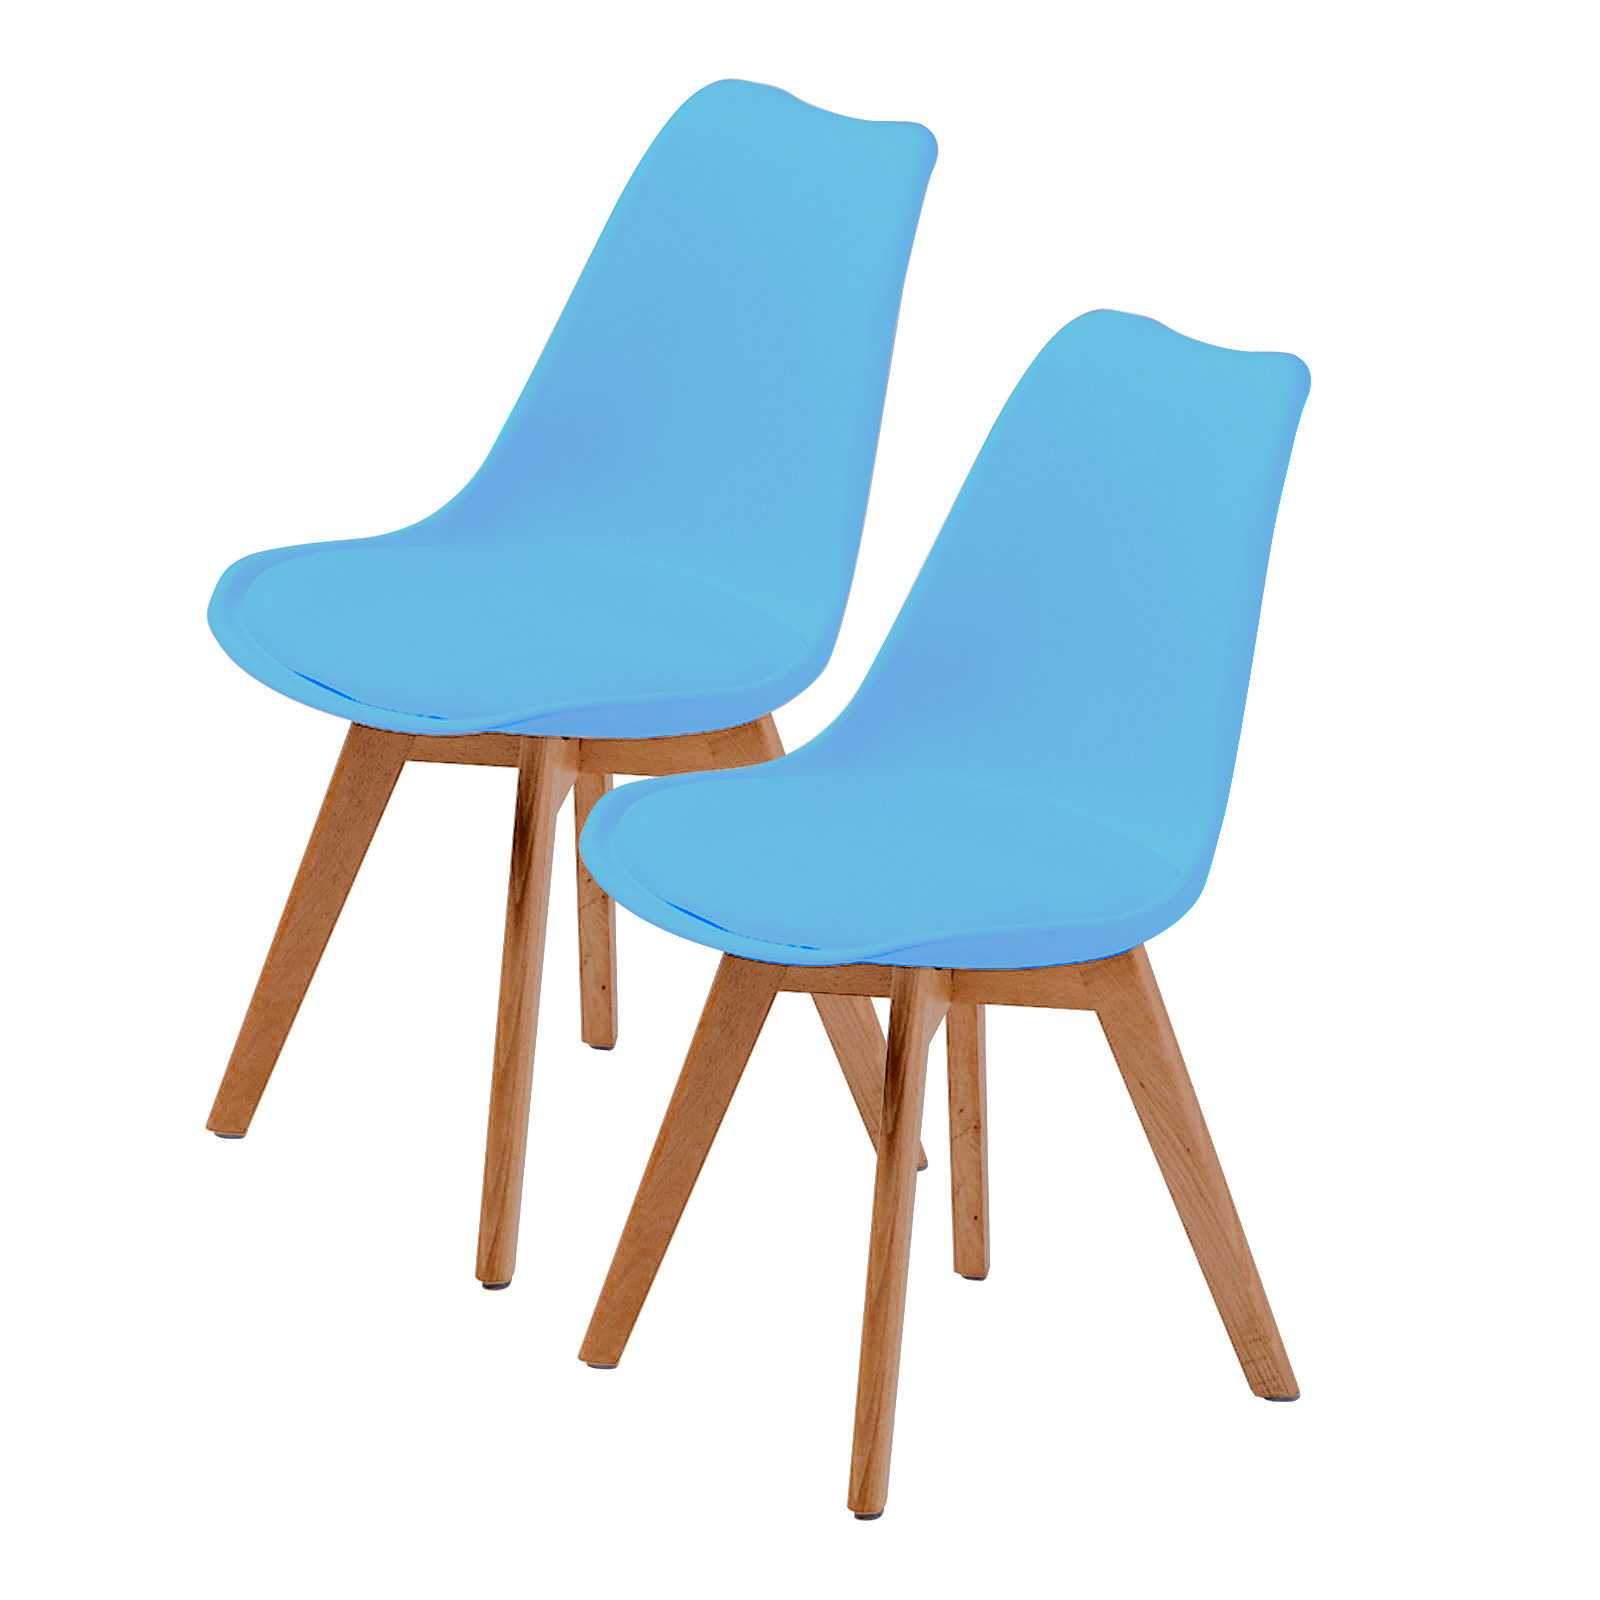 2X Padded Seat Dining Chair - GREY BLUE